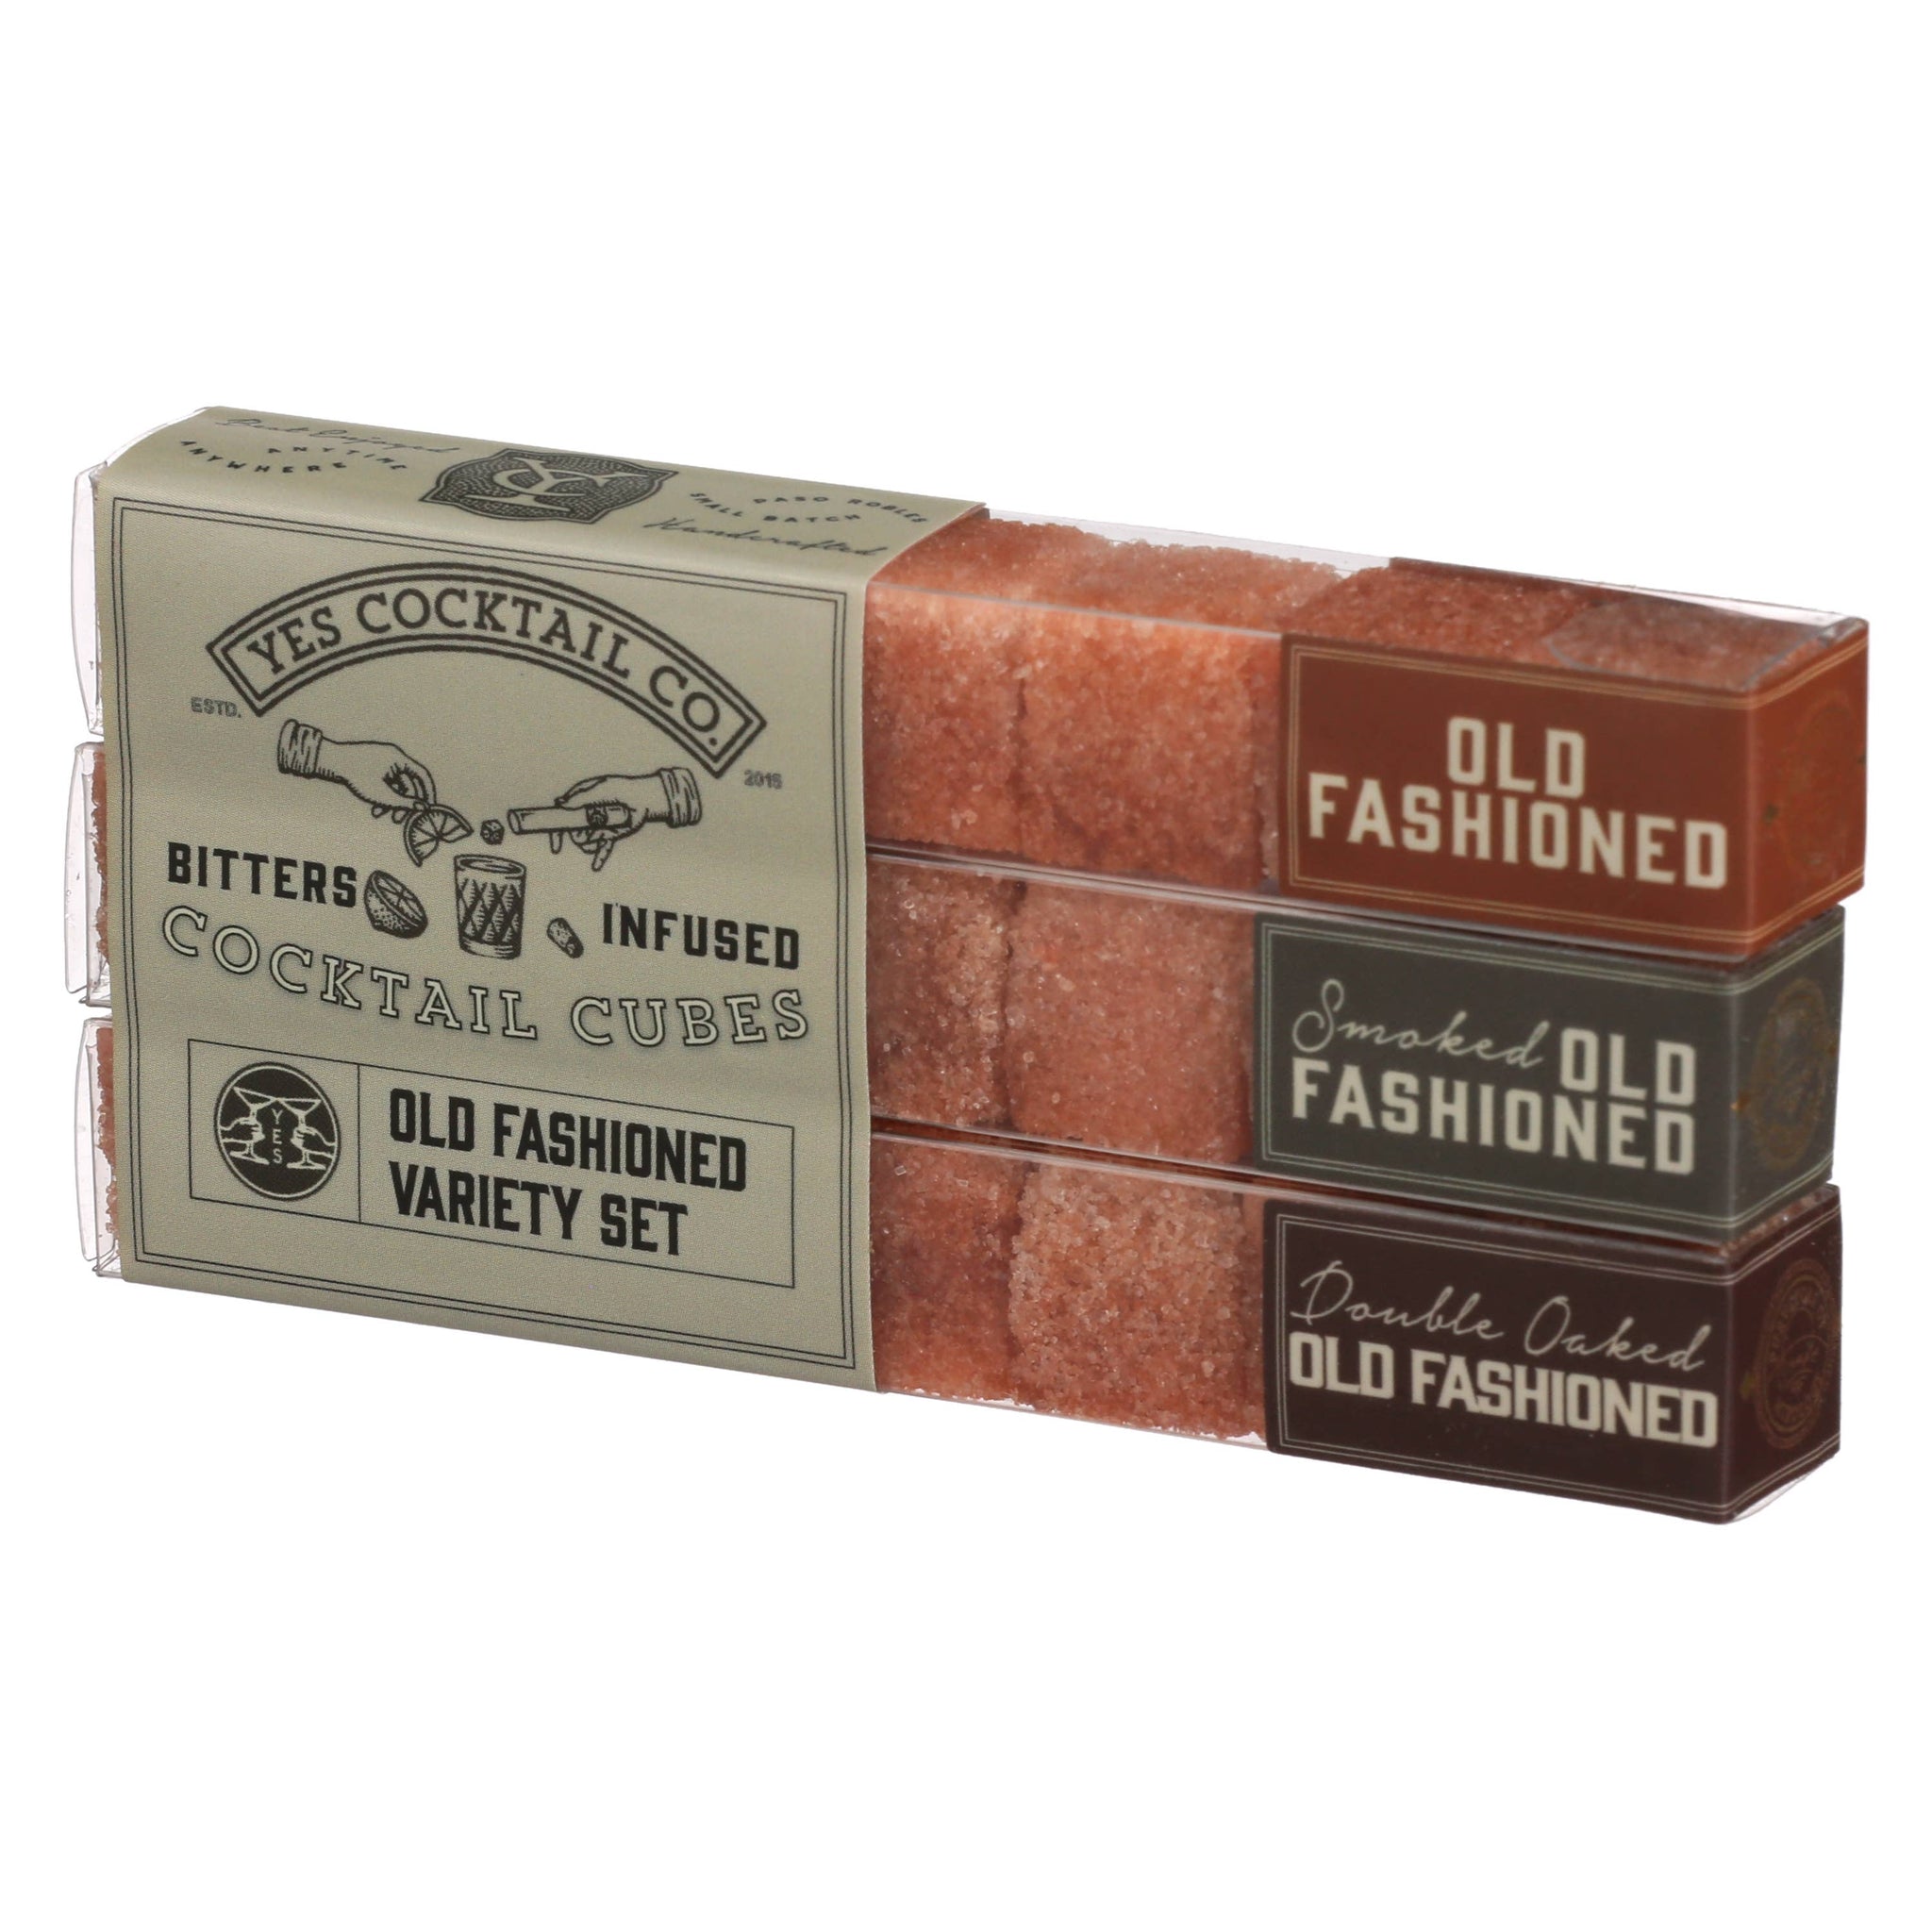 Cocktail Cubes Gift Set, Old Fashioned Variety